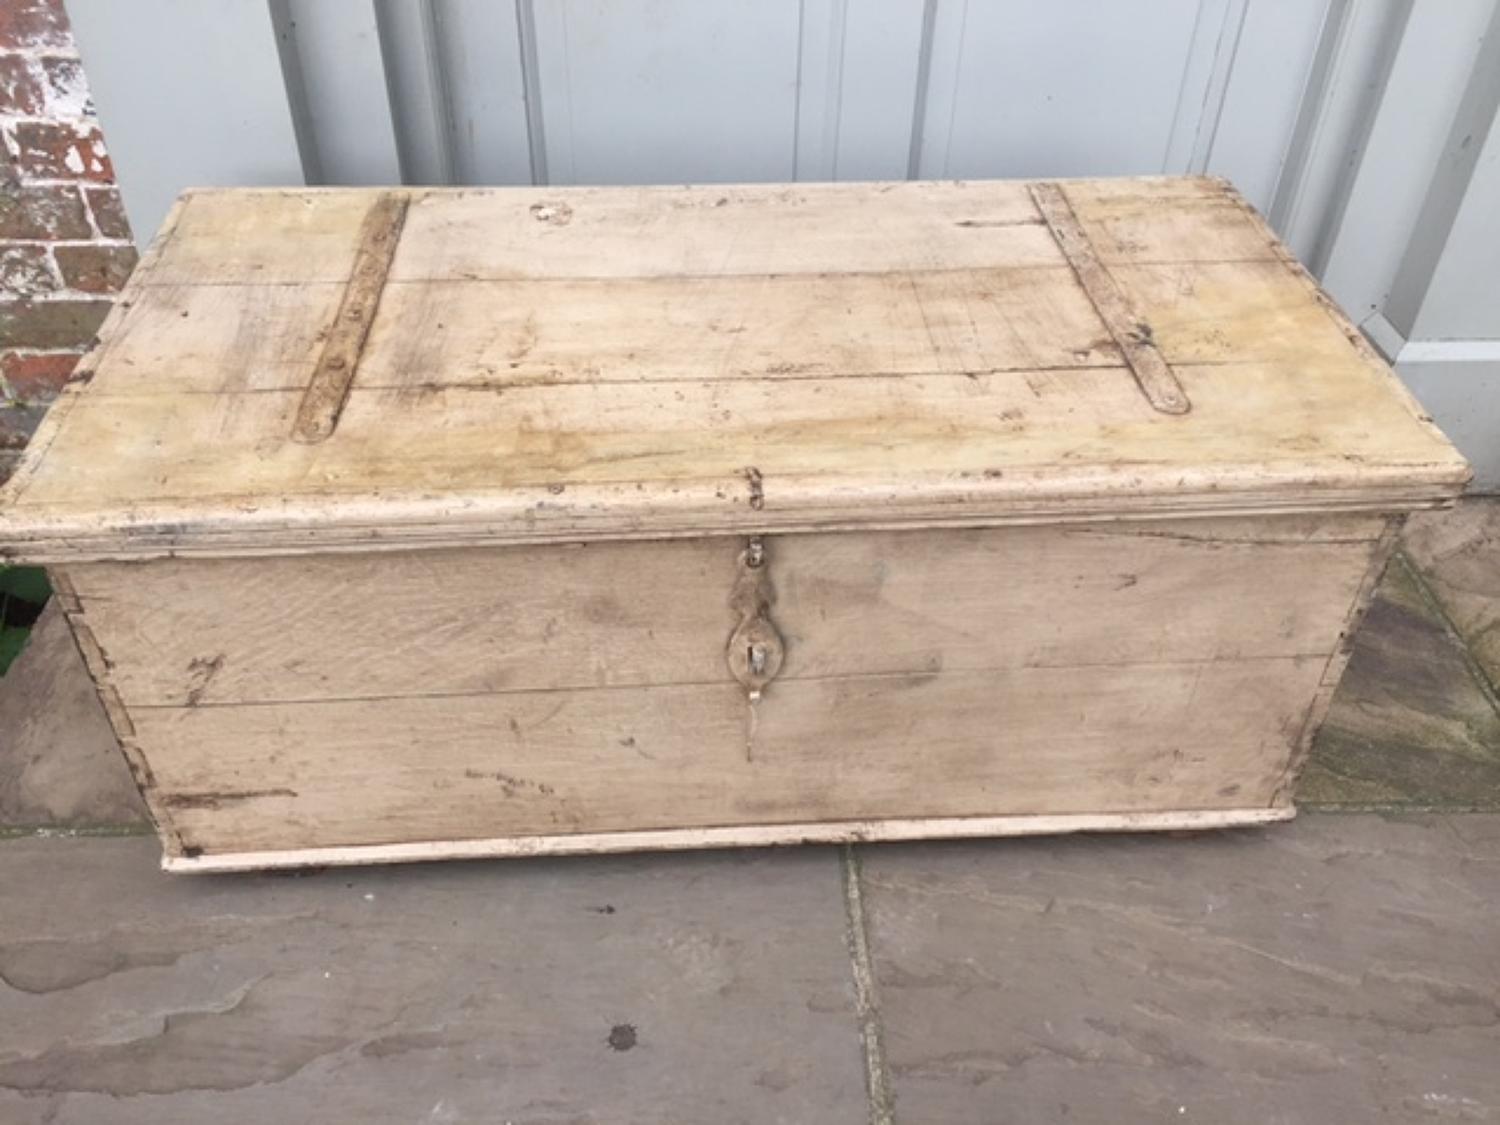 Stunning 19th Cent Box Trunk in original paint